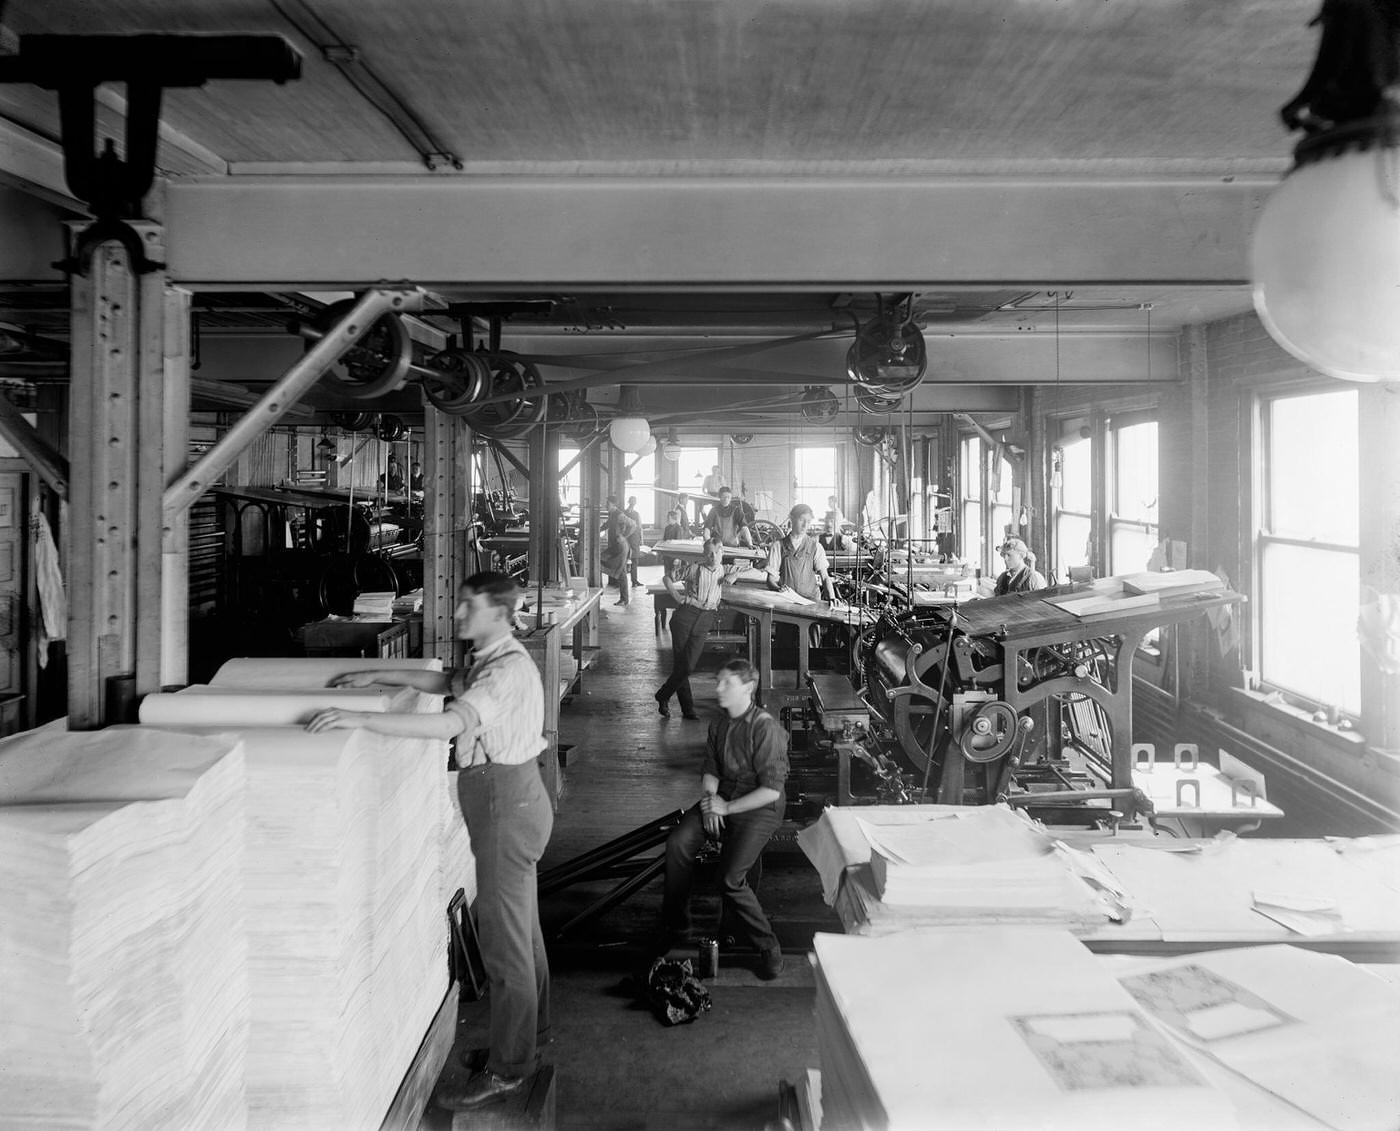 Workers in Press room, Richmond & Backus Company Print Shop, 1902